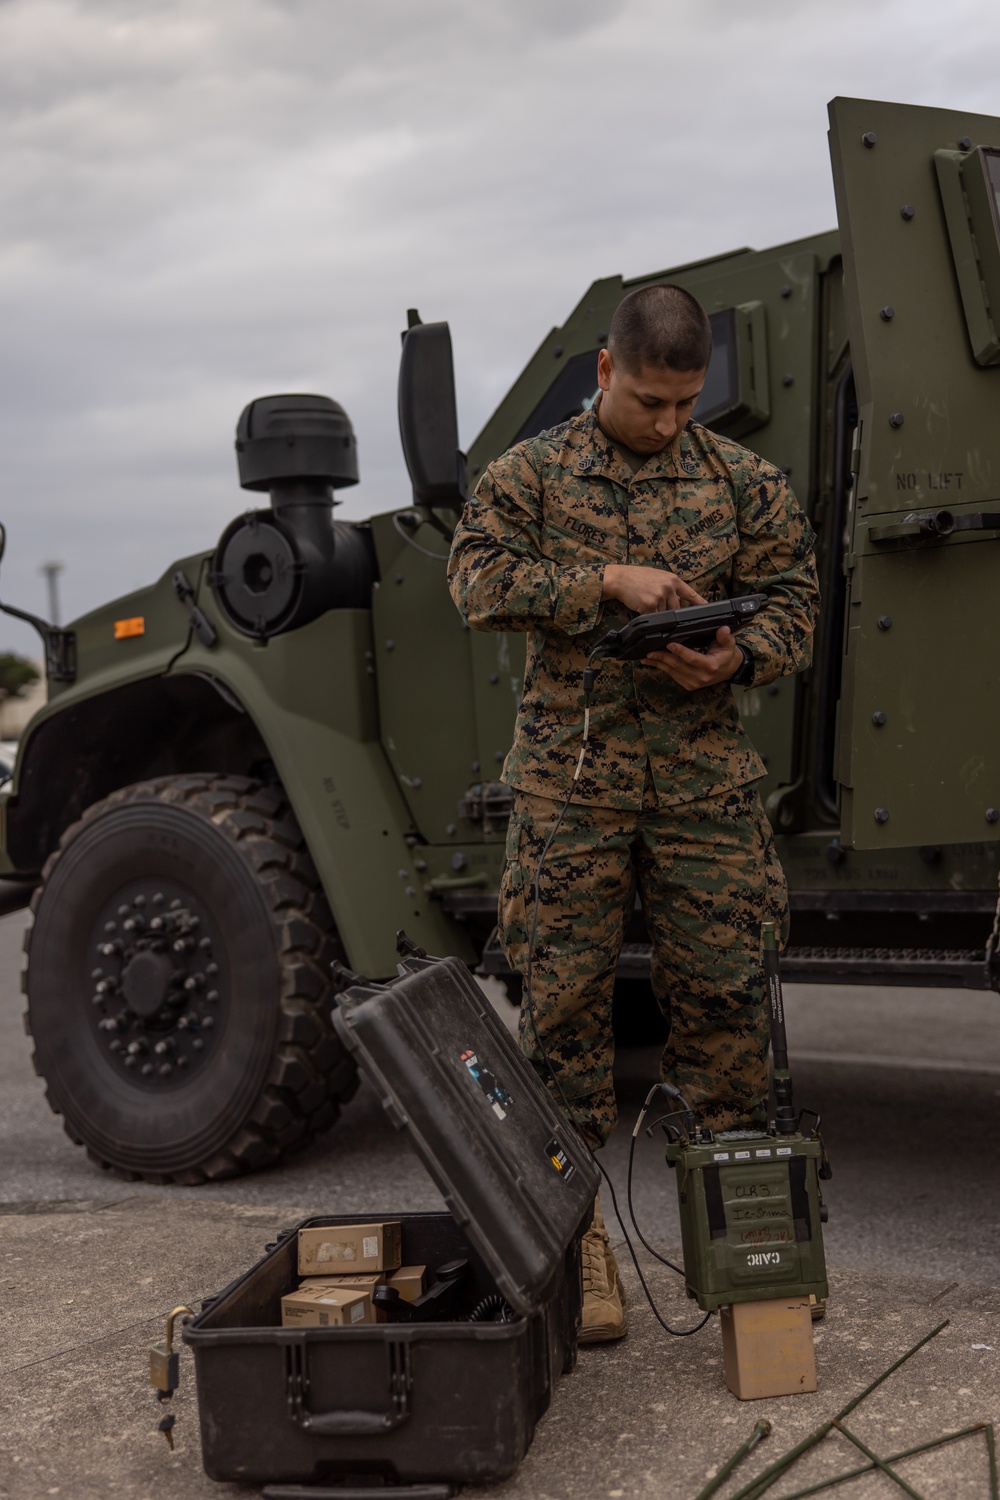 3rd Marine Logistics Group conducts Alert Contingency MAGTF Drill